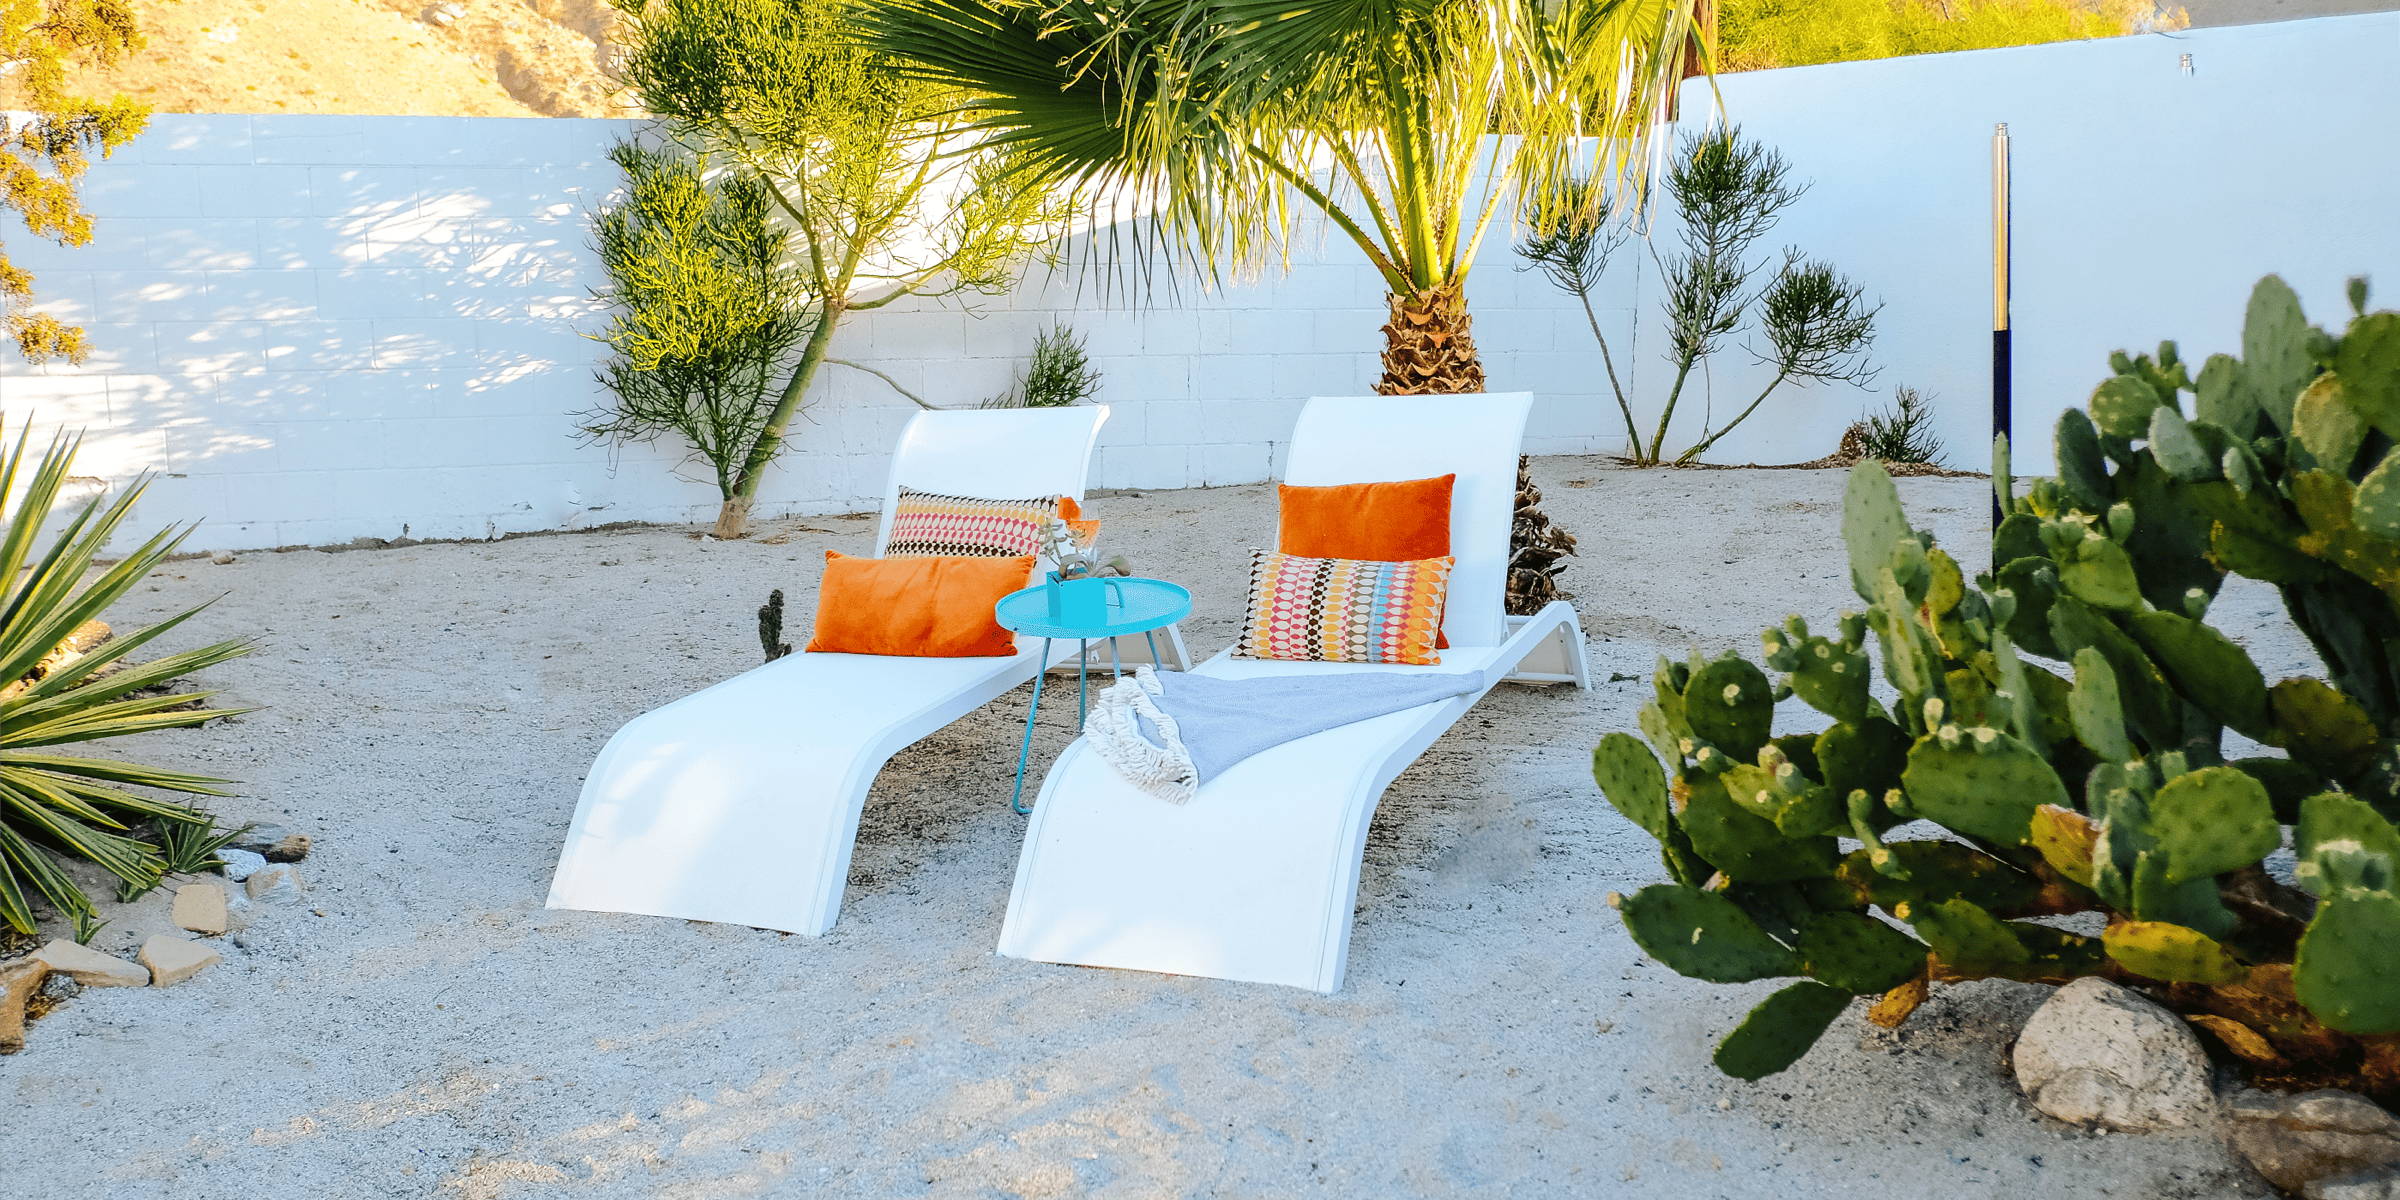 Two chaise lounge chairs in a desert garden adorned with brightly colored pillows. 